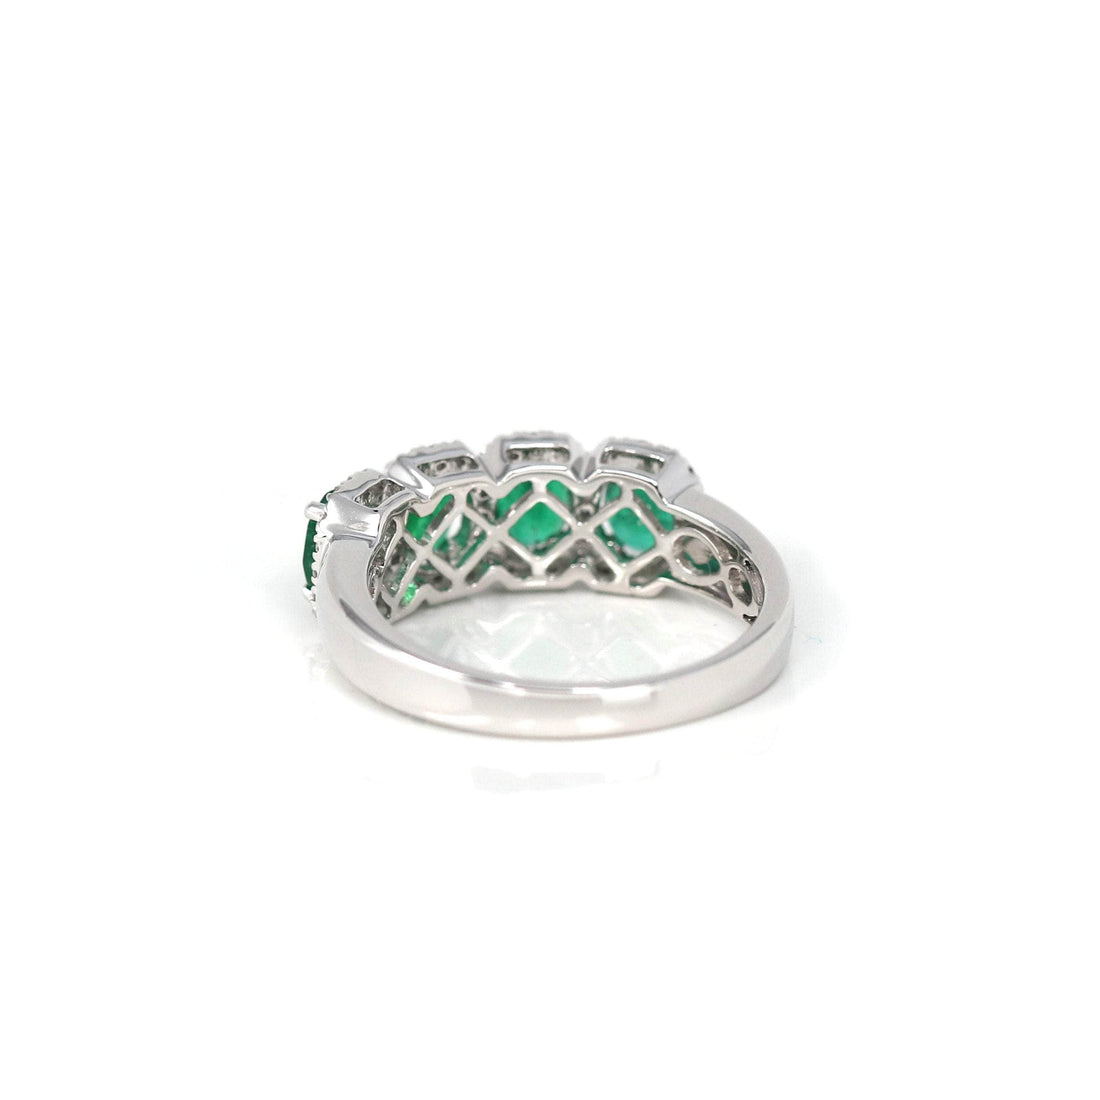 Baikalla Jewelry Gold Emerald Ring 18k White Gold Natural Emerald Four Stones Set Band Ring with Diamonds